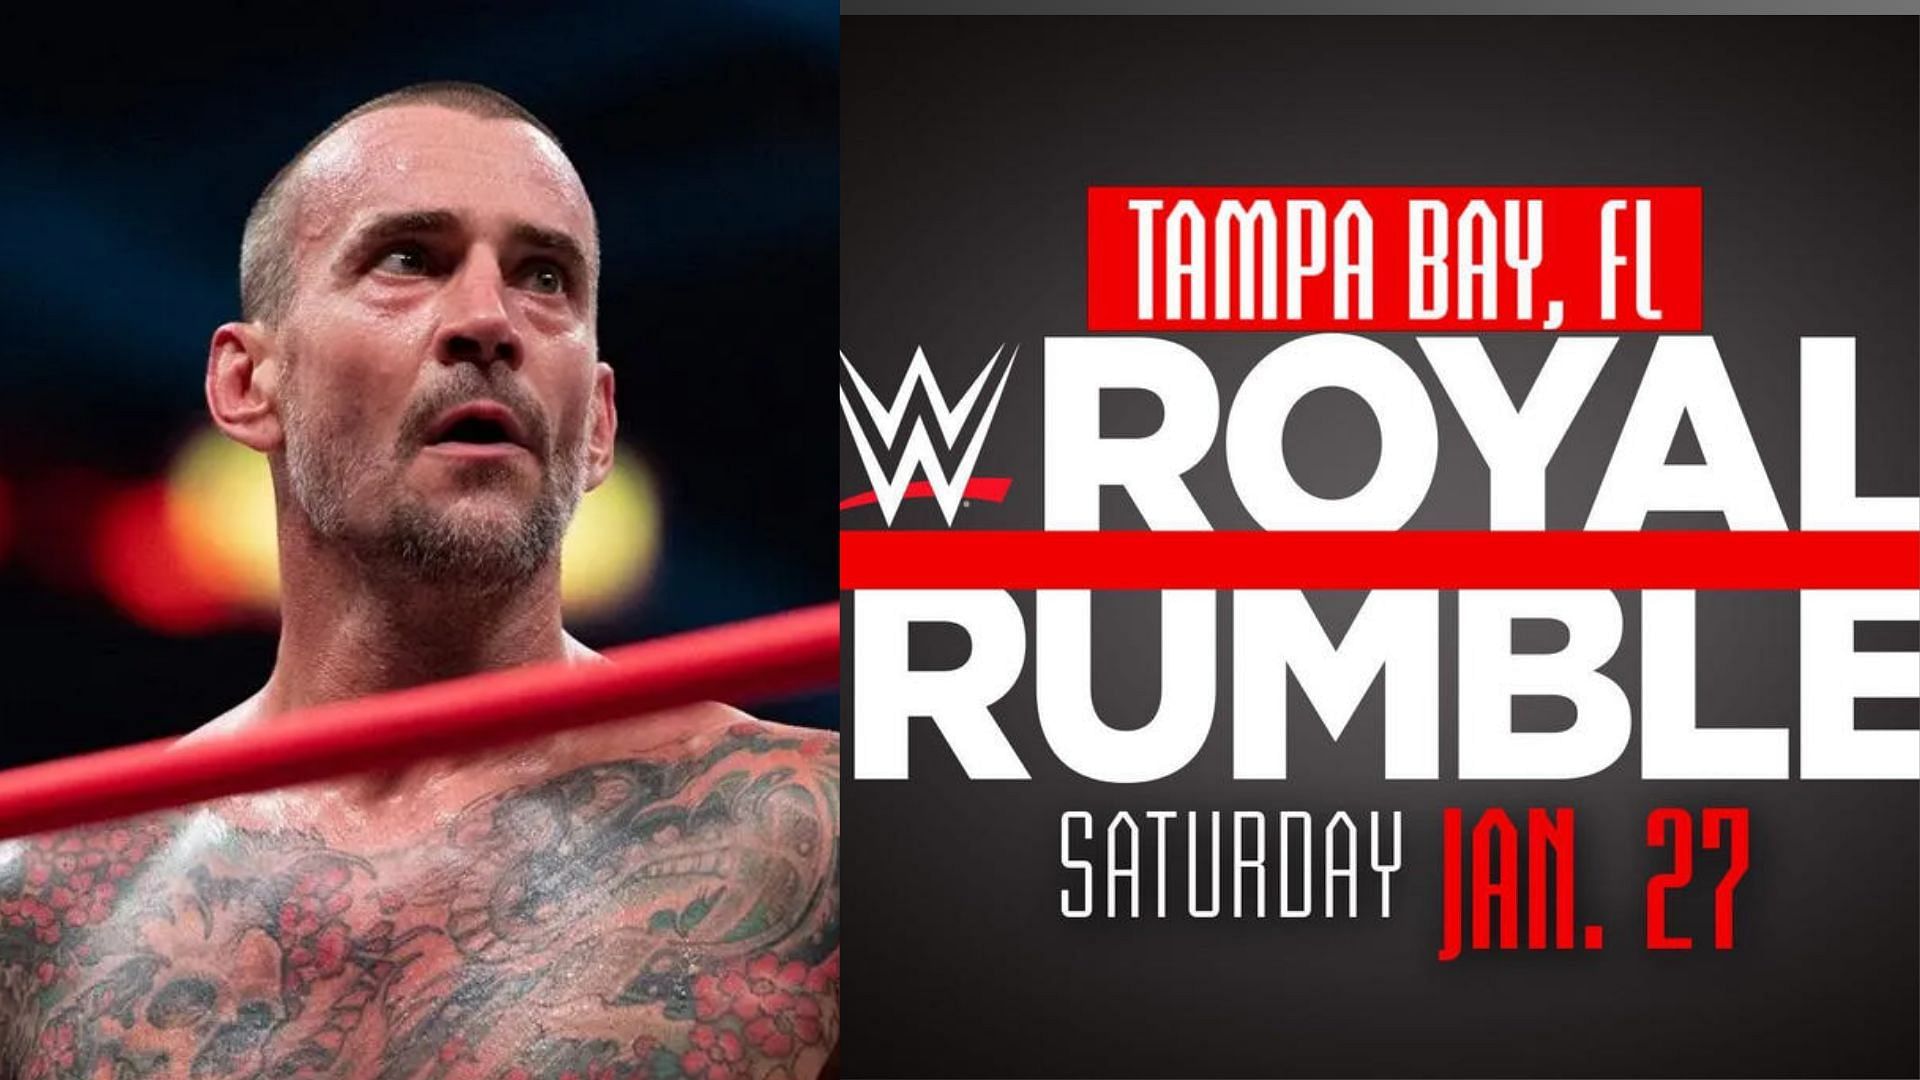 WWE Royal Rumble was mentioned during a non-WWE event